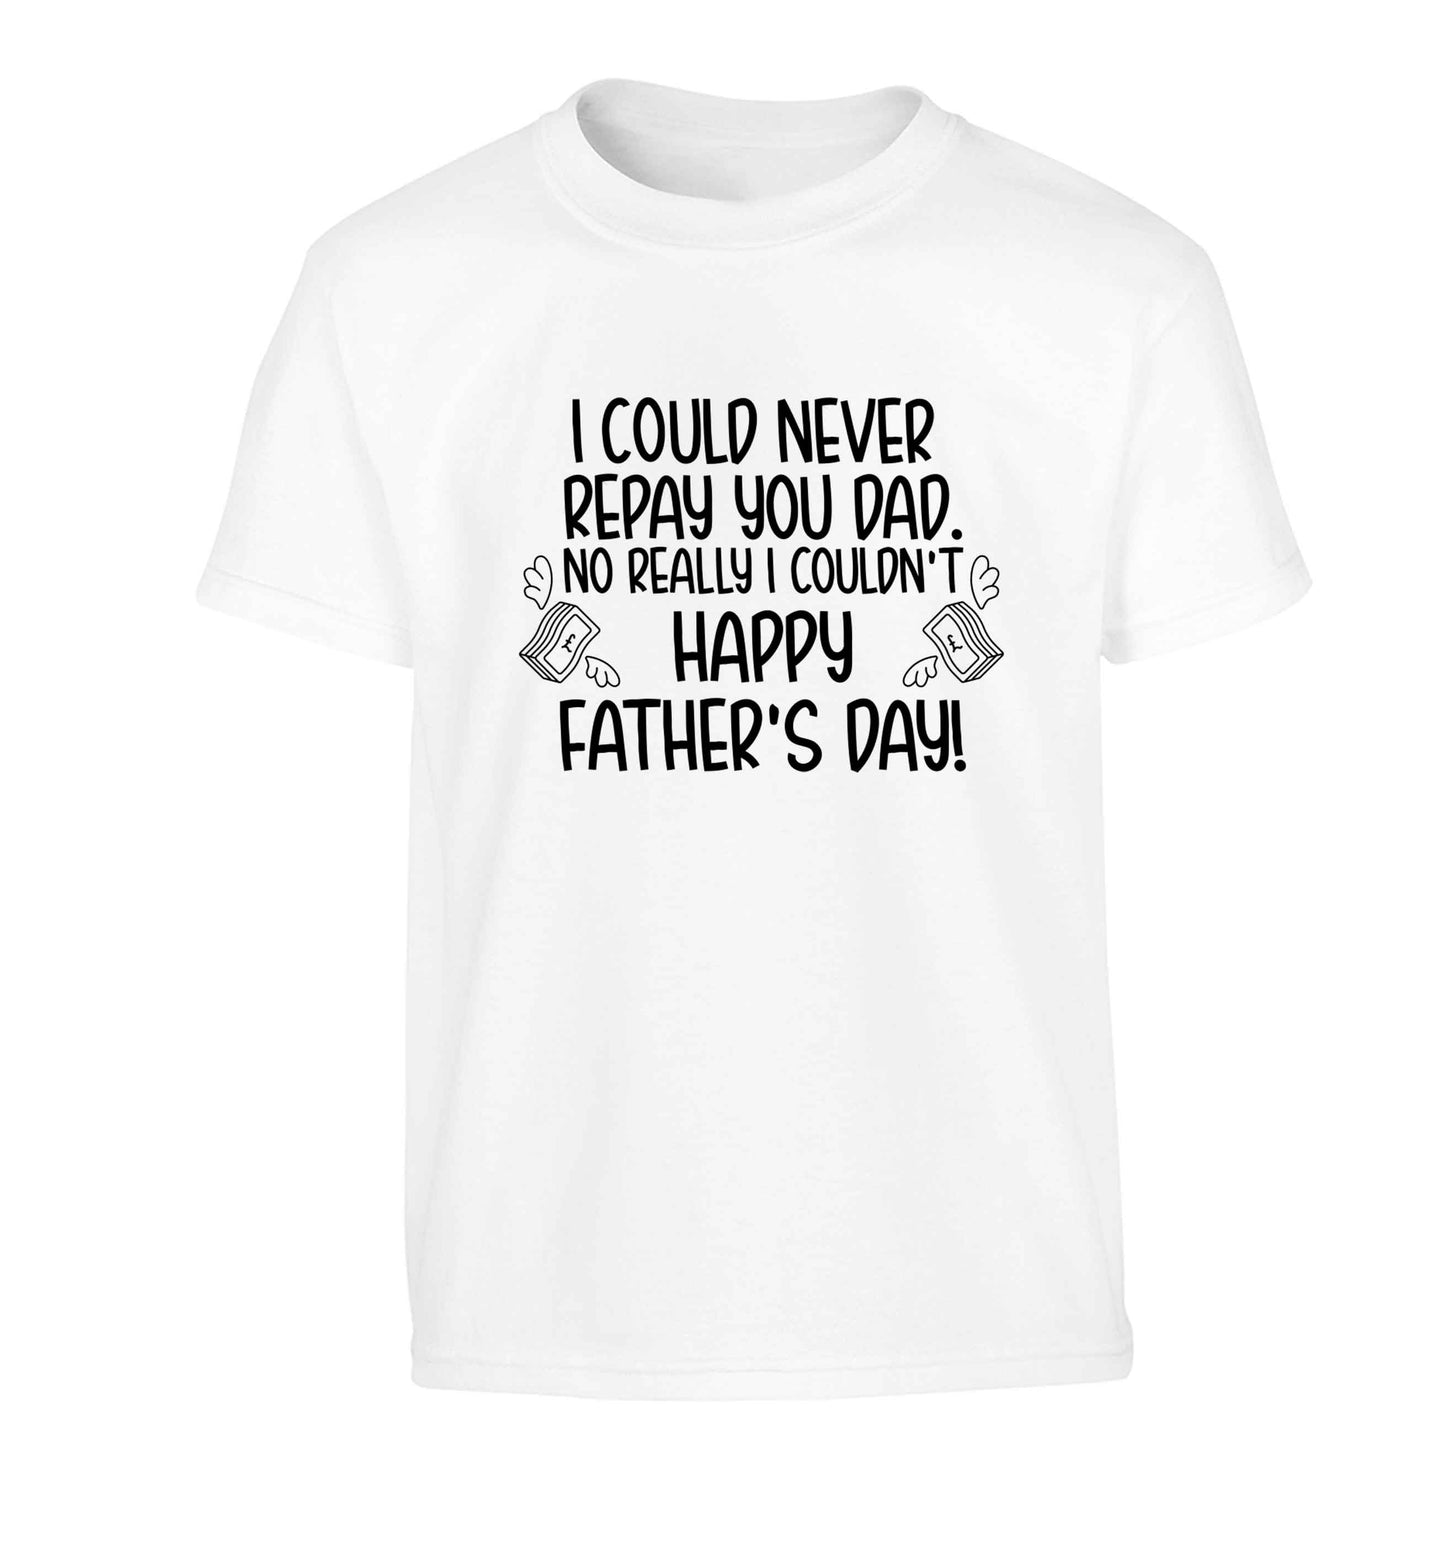 I could never repay you dad. No I really couldn't happy Father's day! Children's white Tshirt 12-13 Years